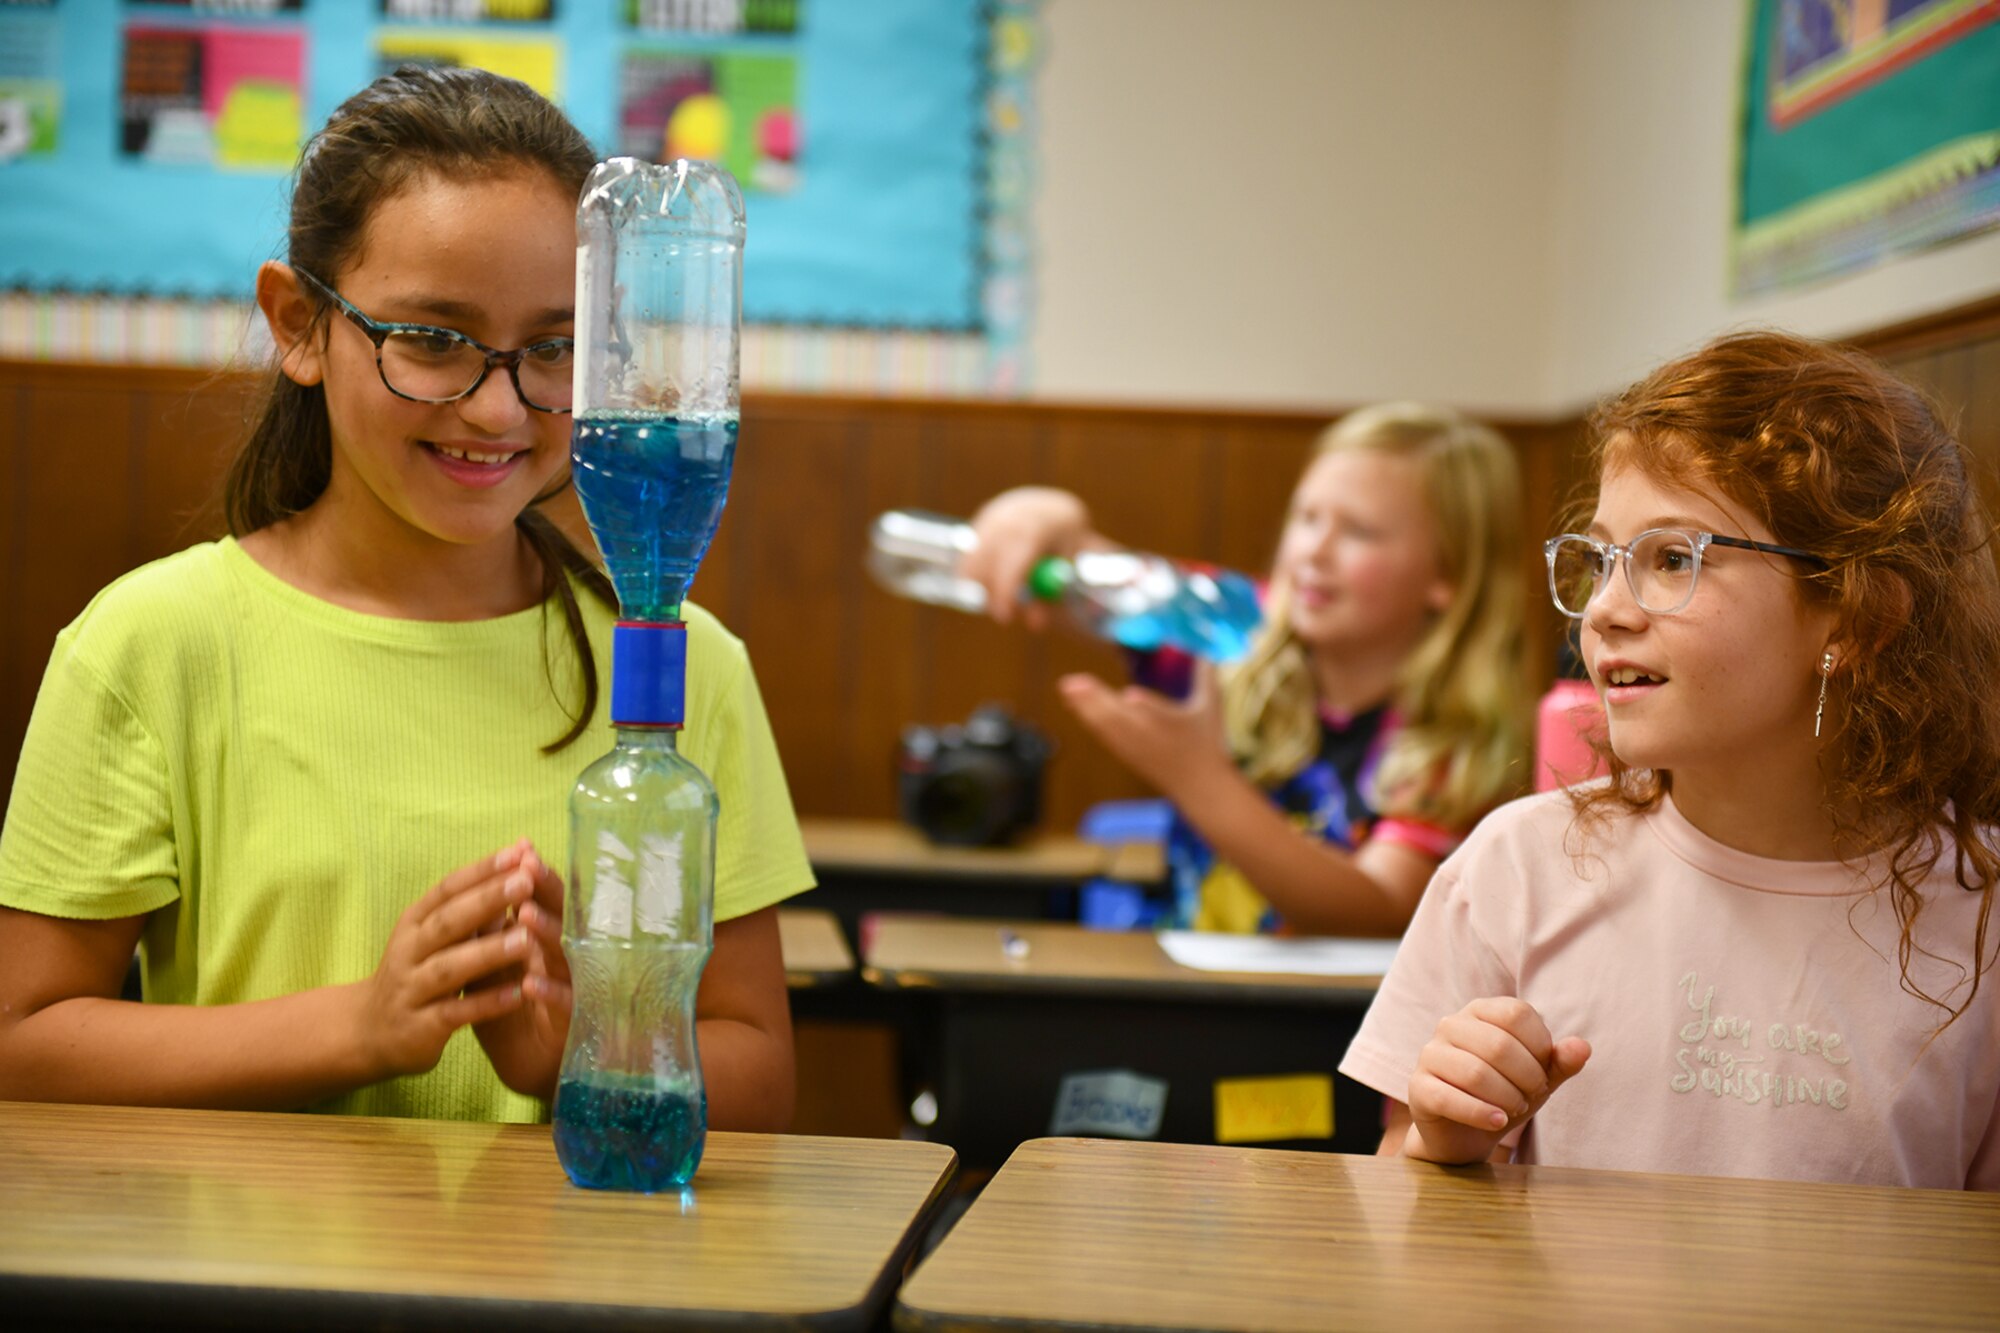 Lilly Weston (left) and Tessa Mary (right) 4th grade students at Navajo Elementary School watch a water tornado in a bottle they created with plastic bottles, water, glitter and food coloring  in Altus, Oklahoma, Sep. 28, 2021. The team was able to educate students on the dangers of disasters and what they can do in the event that one strikes. (U.S. Air Force photo by Tech. Sgt. Robert Sizelove)